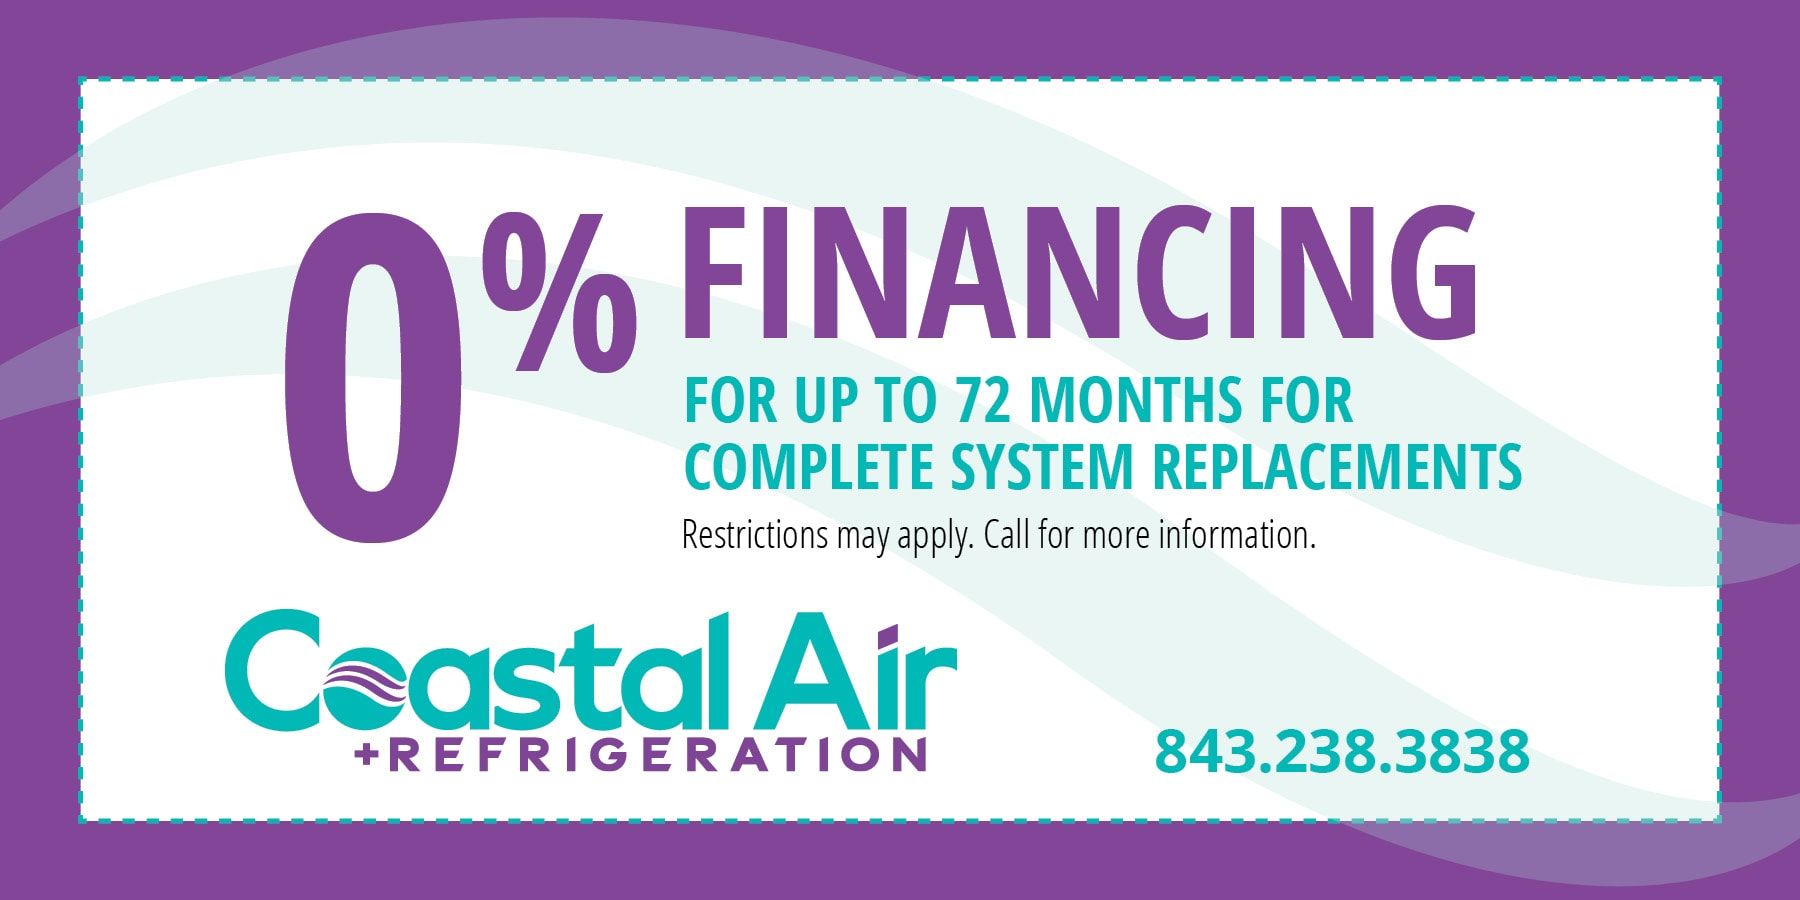 A coupon for coastal air refrigeration offers 0 % financing for up to 72 months for complete system replacements